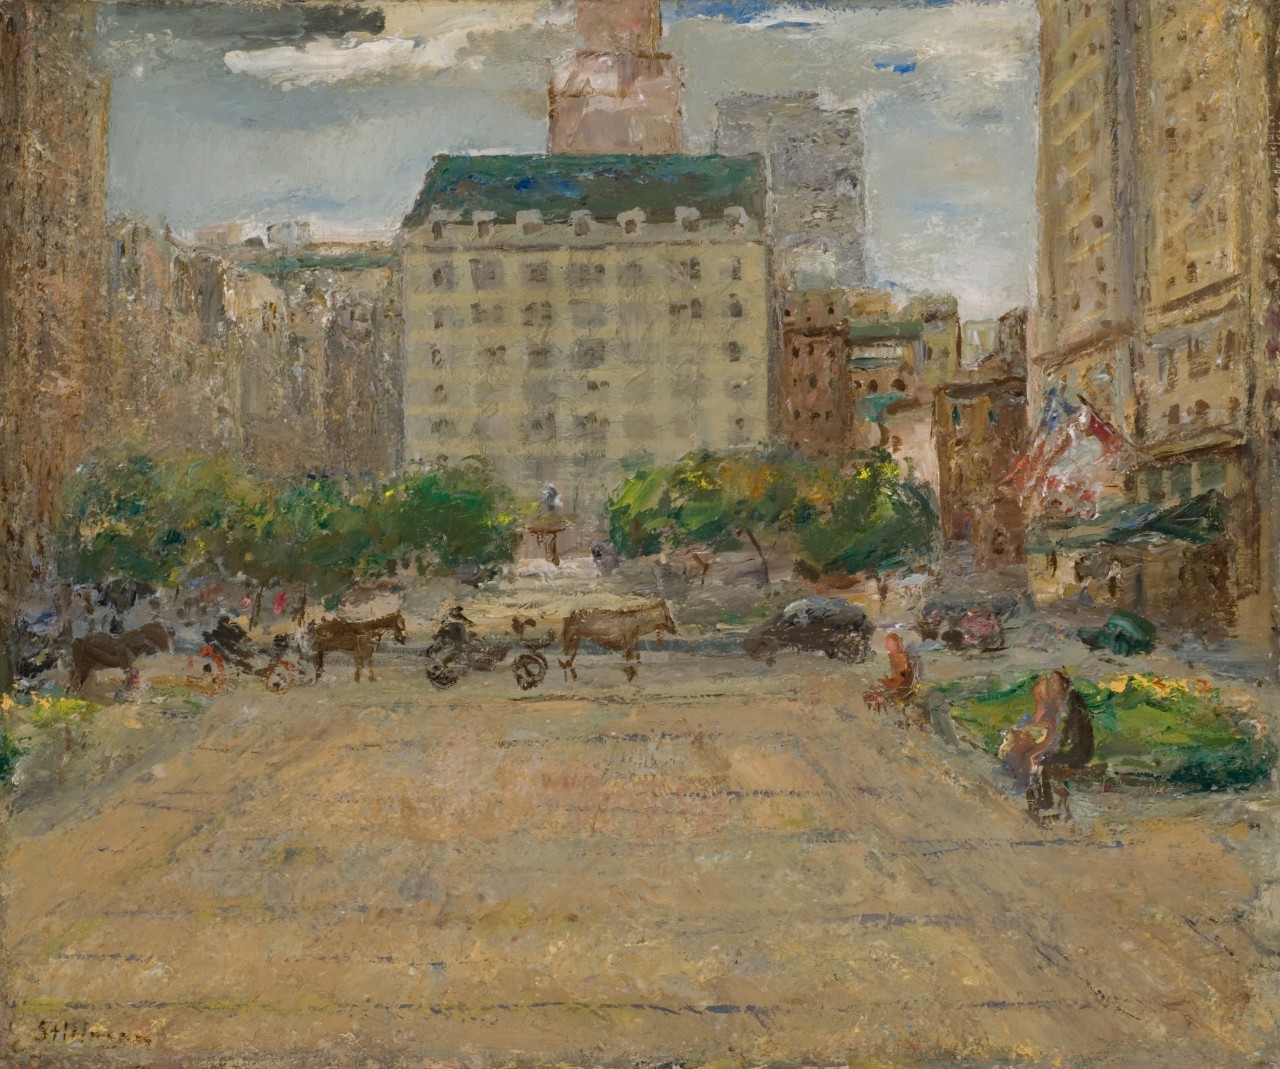 Plaza Hotel, 59th Street and 5th Avenue, 1944,  oil on canvas 23 3/4 x 19 3/4 in., [SLF-129] F